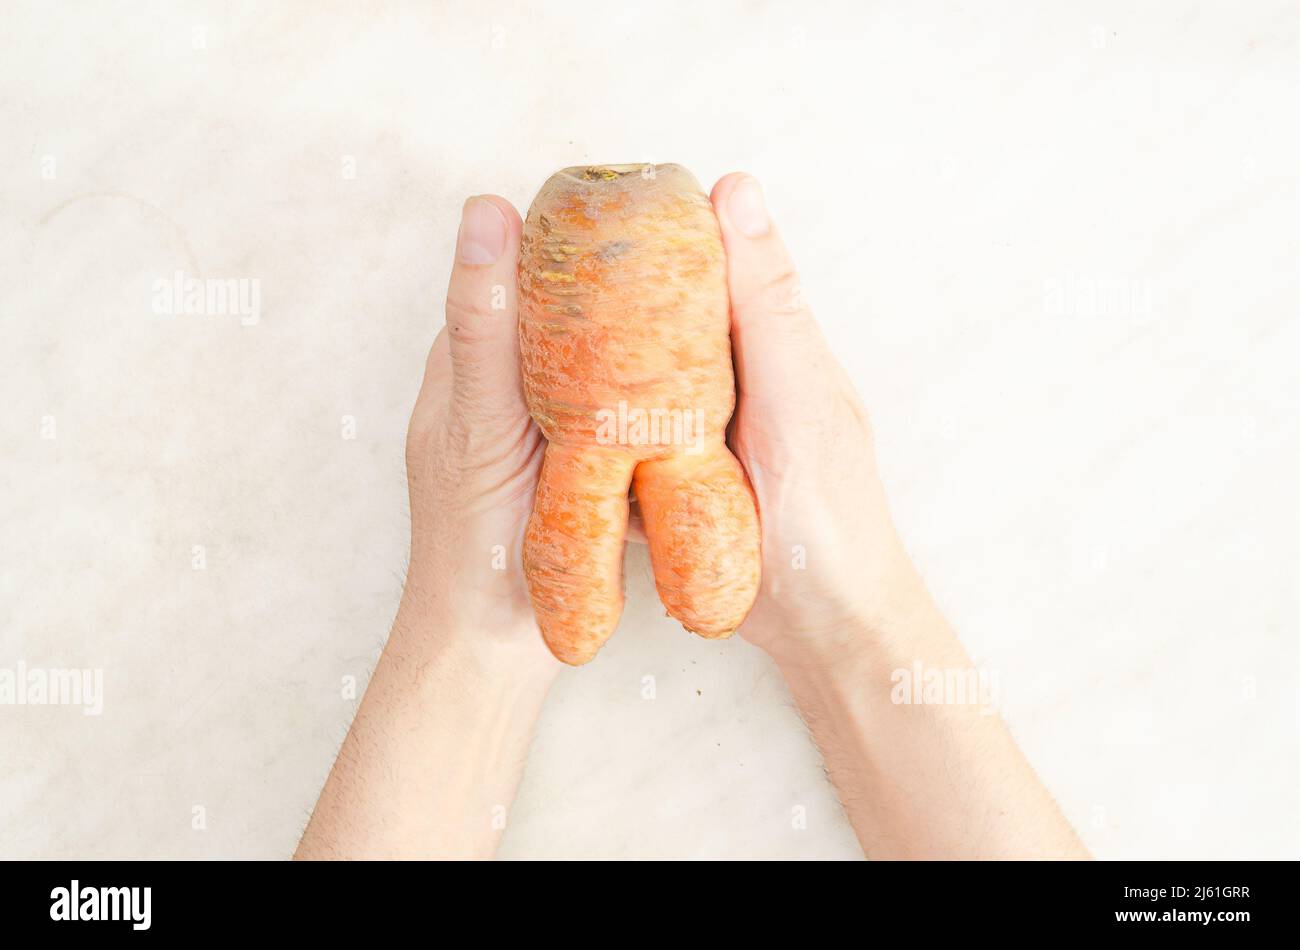 Hands hold ugly carrot in the shape of a little man on white background.Funny, unnormal vegetable or food waste concept. Stock Photo